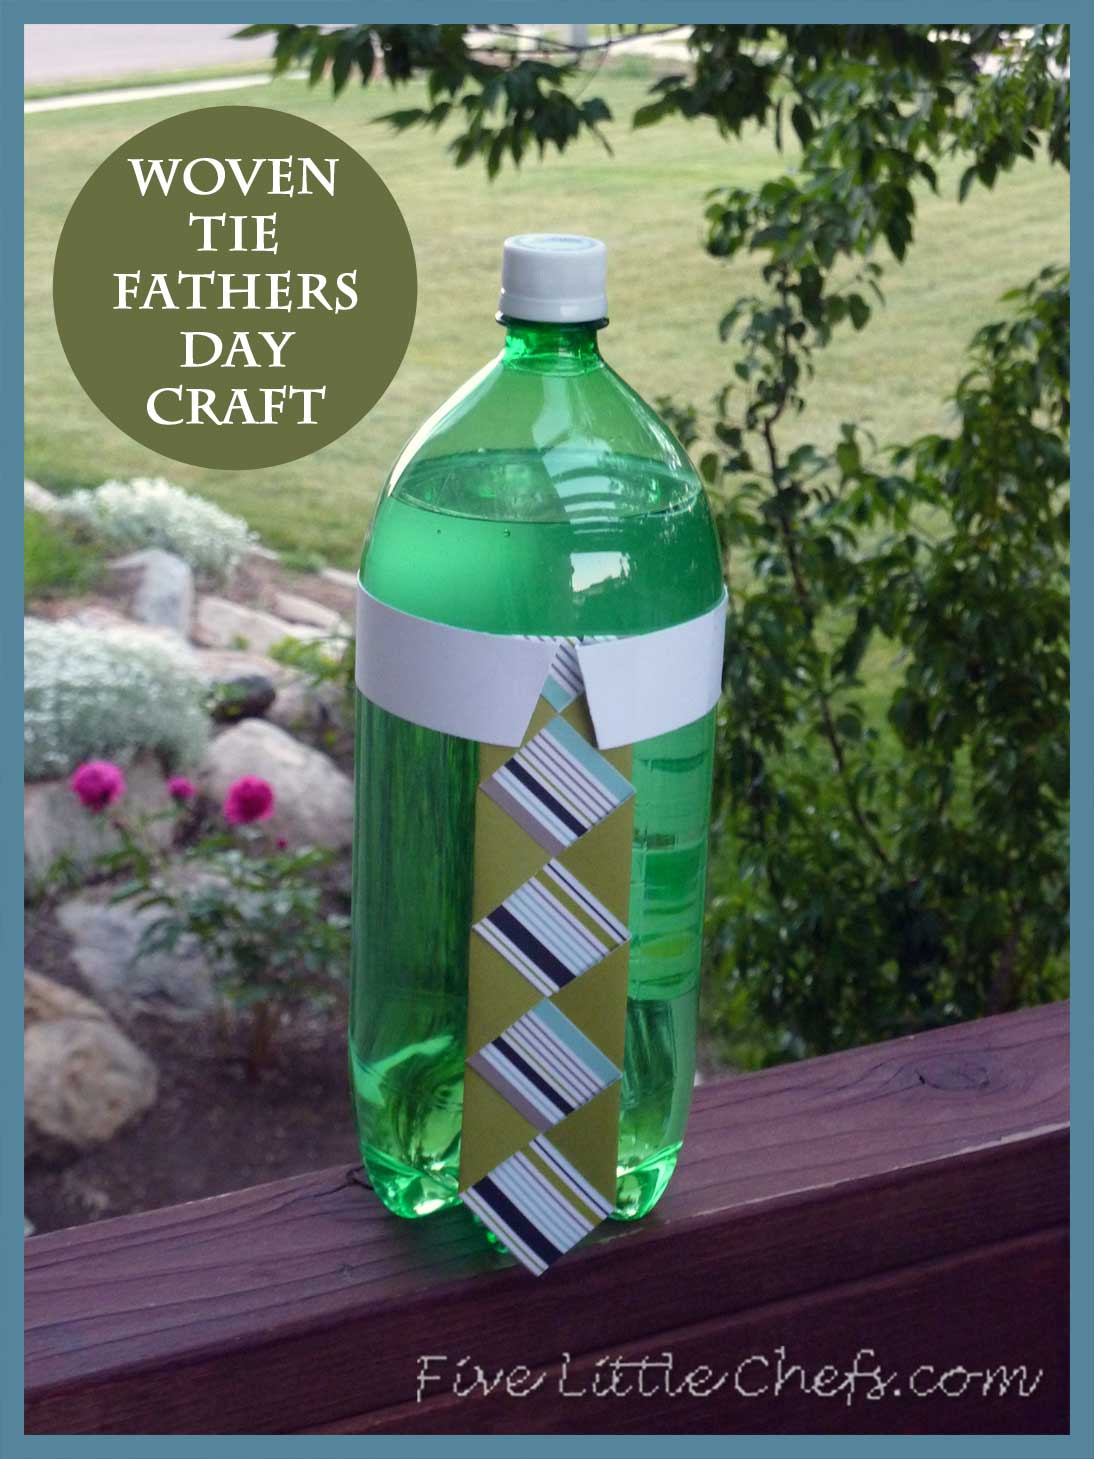 Need a quick fathers day craft? fivelittlechefs.com has a low cost, common supplies craft idea for kids. #fathers day craft